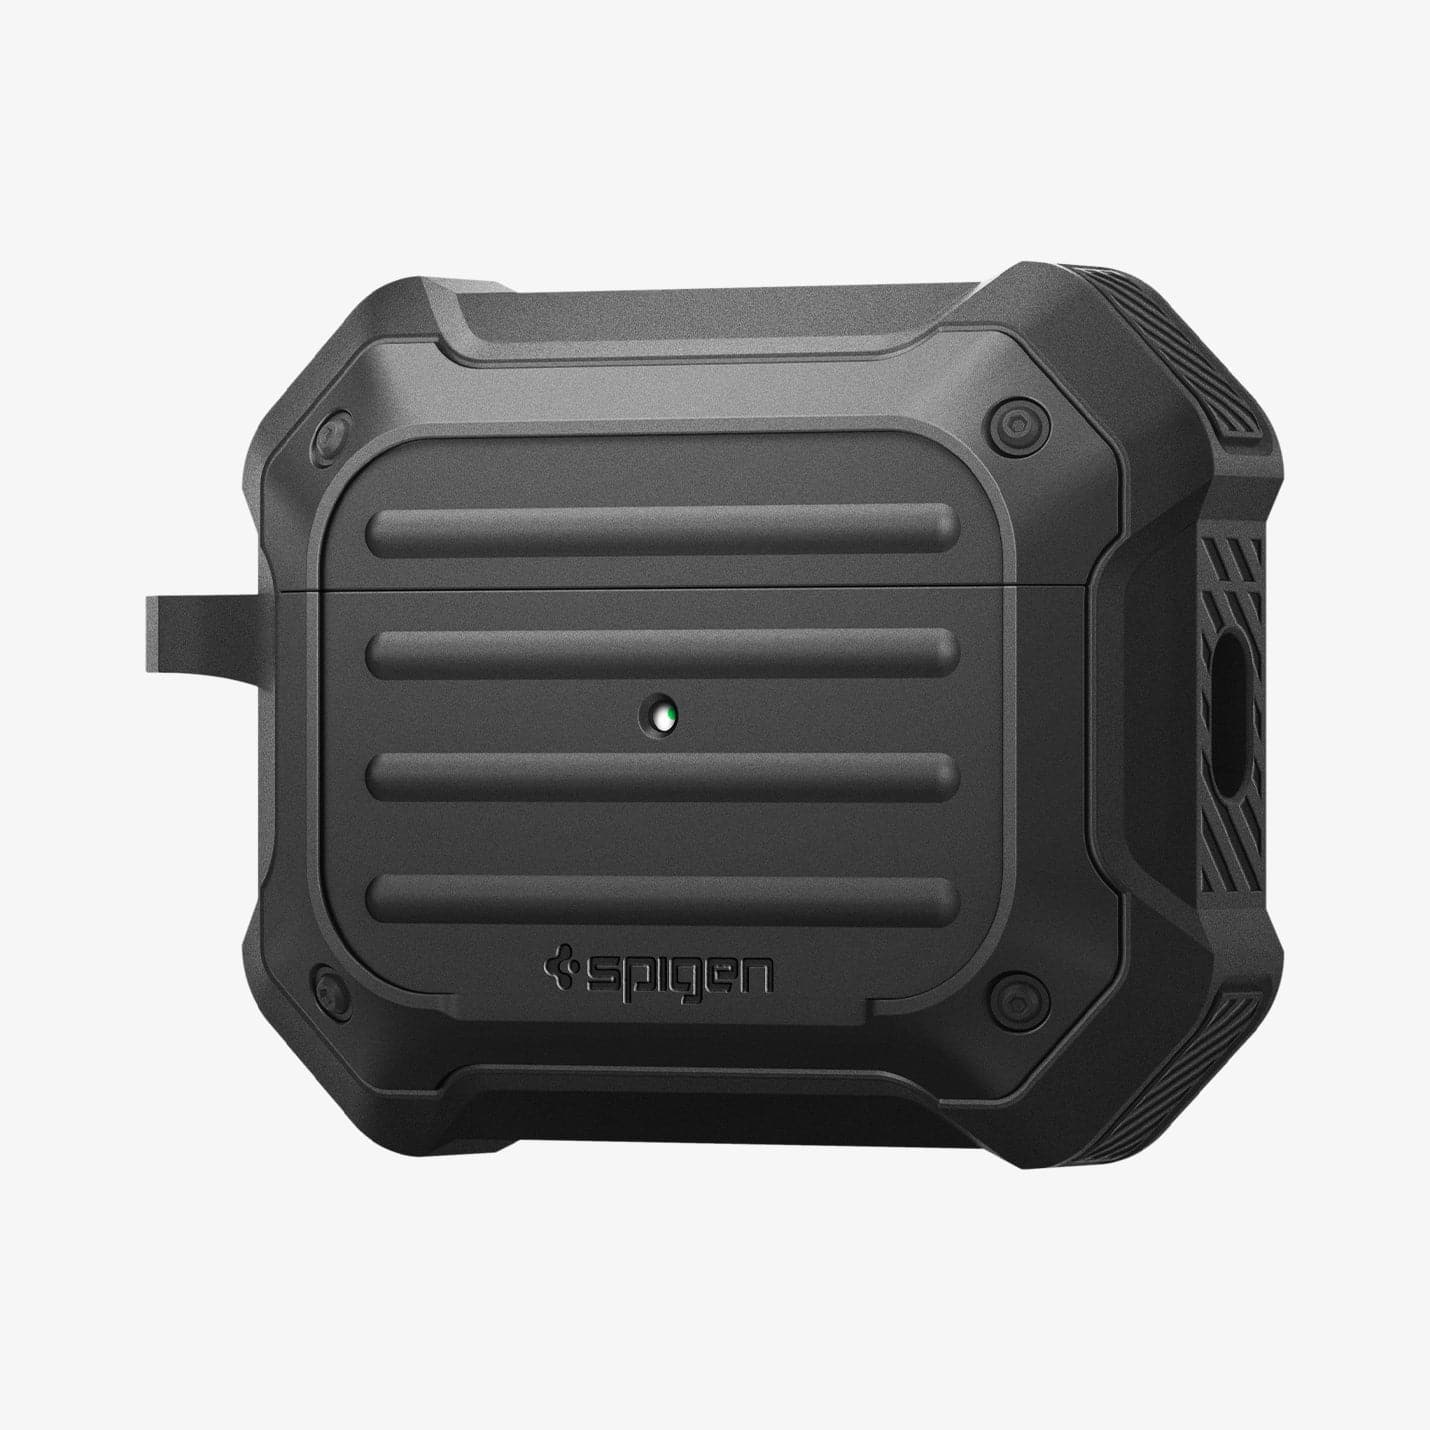 ACS05480 - Apple AirPods Pro 2 Case Tough Armor in black showing the front and side